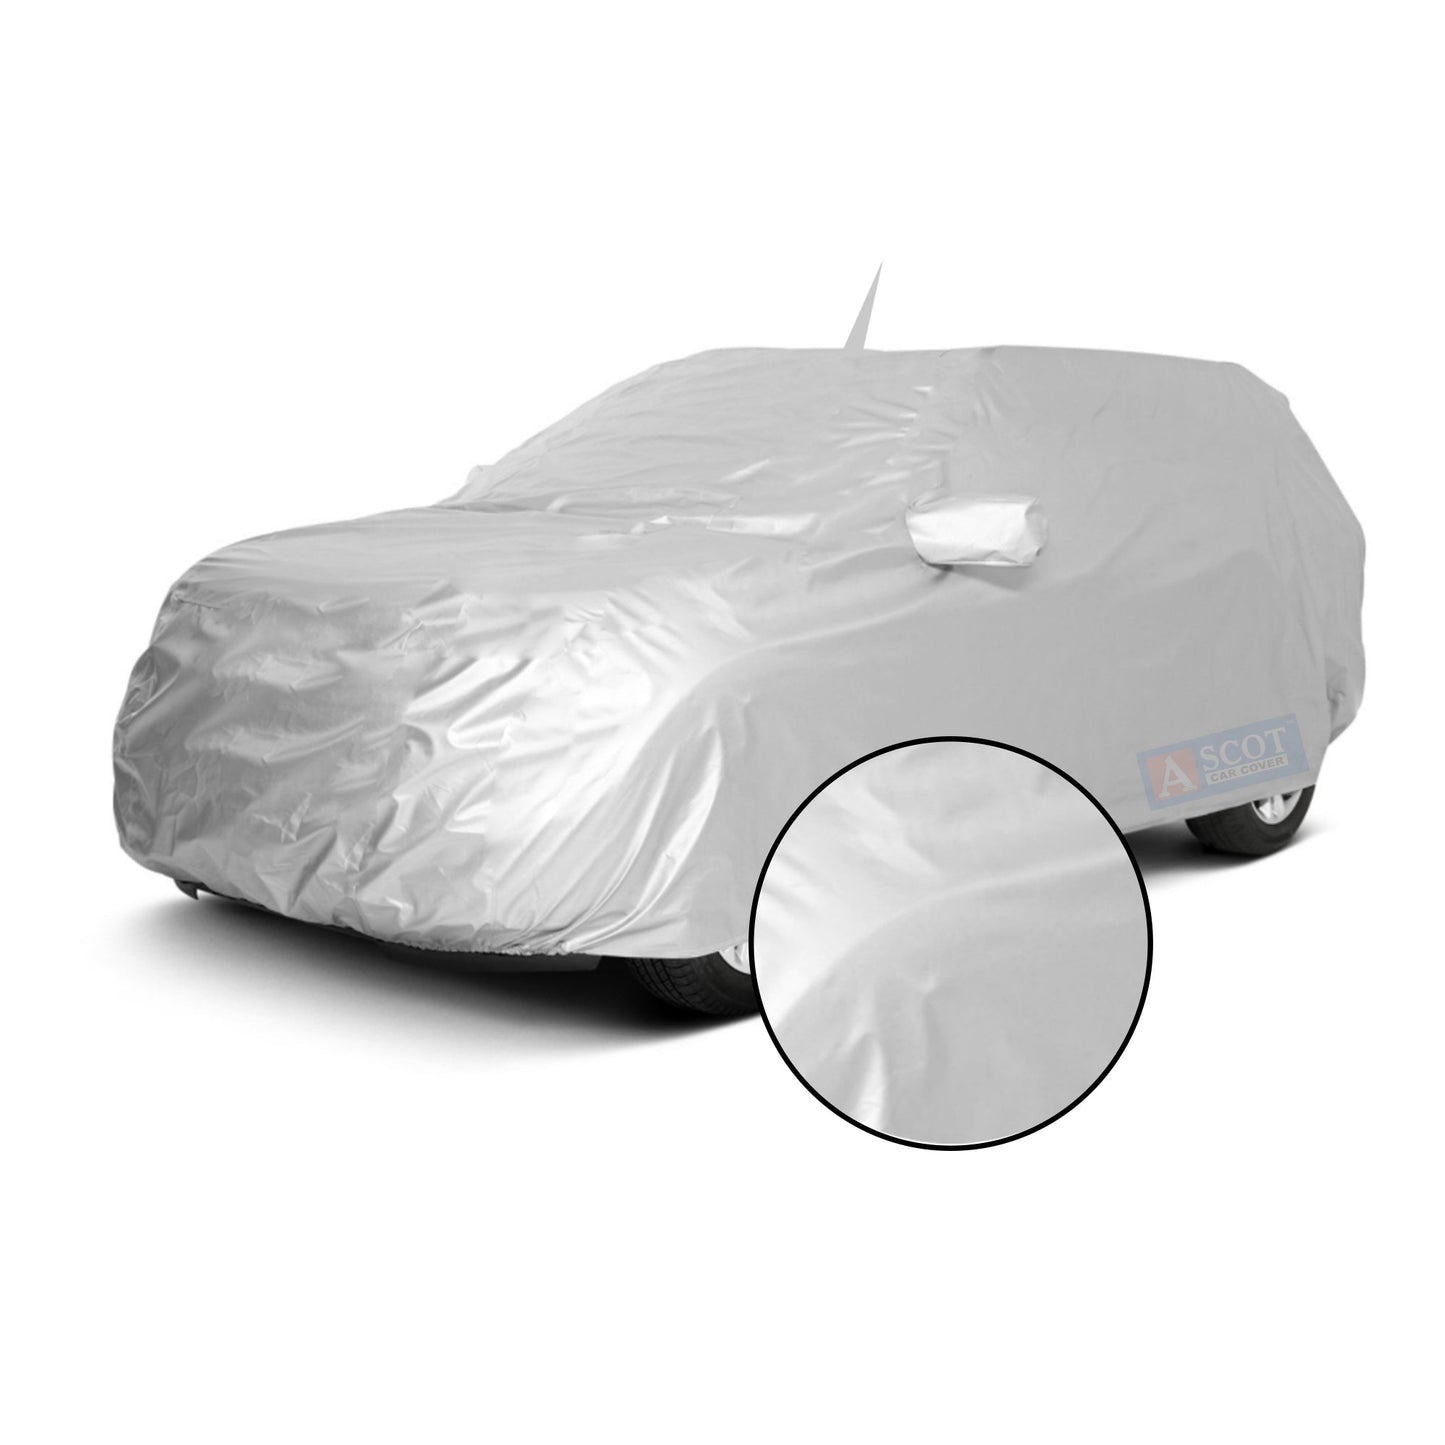 Ascot Toyota Fortuner Car Body Cover Dust Proof, Trippel Stitched